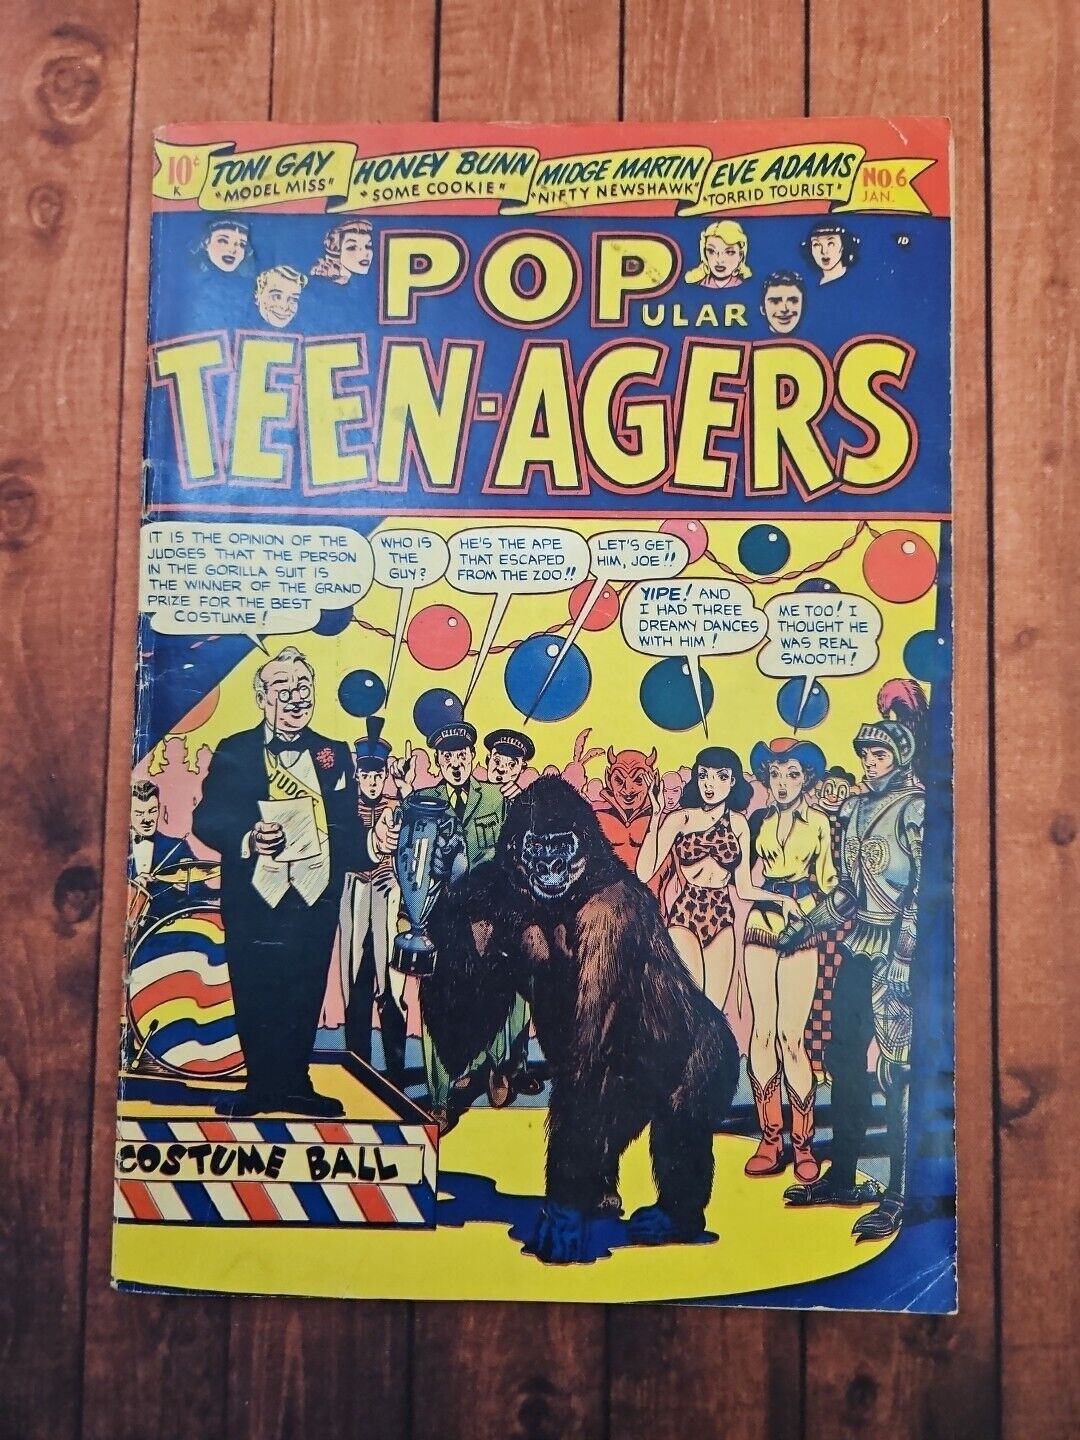 Popular Teen-Agers #6 VG- 2.5 1950 Star Publications Check out the pics